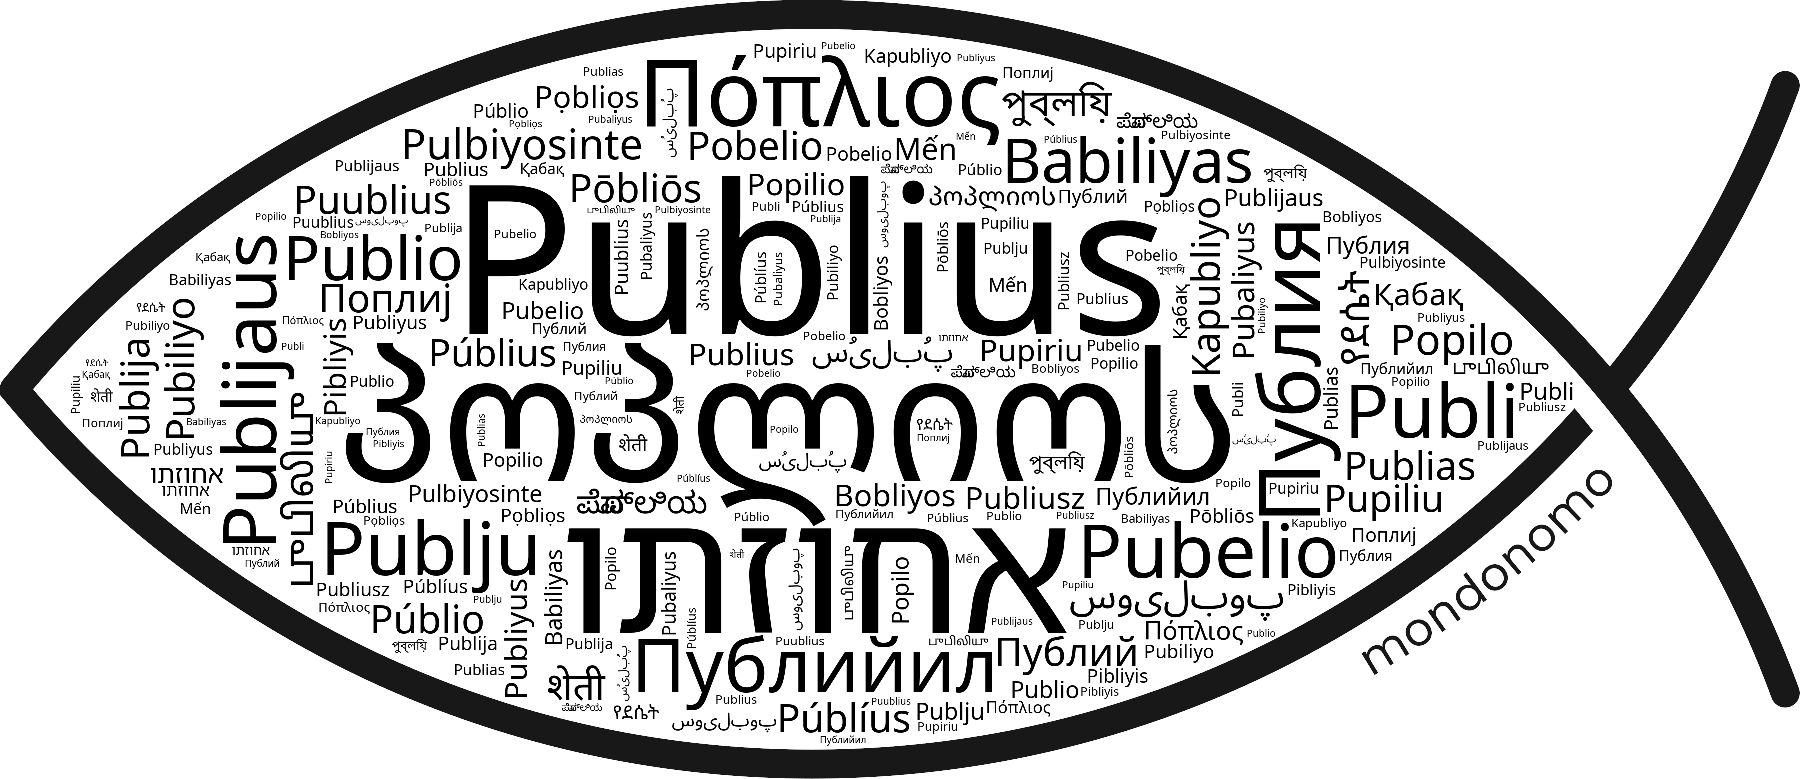 Name Publius in the world's Bibles